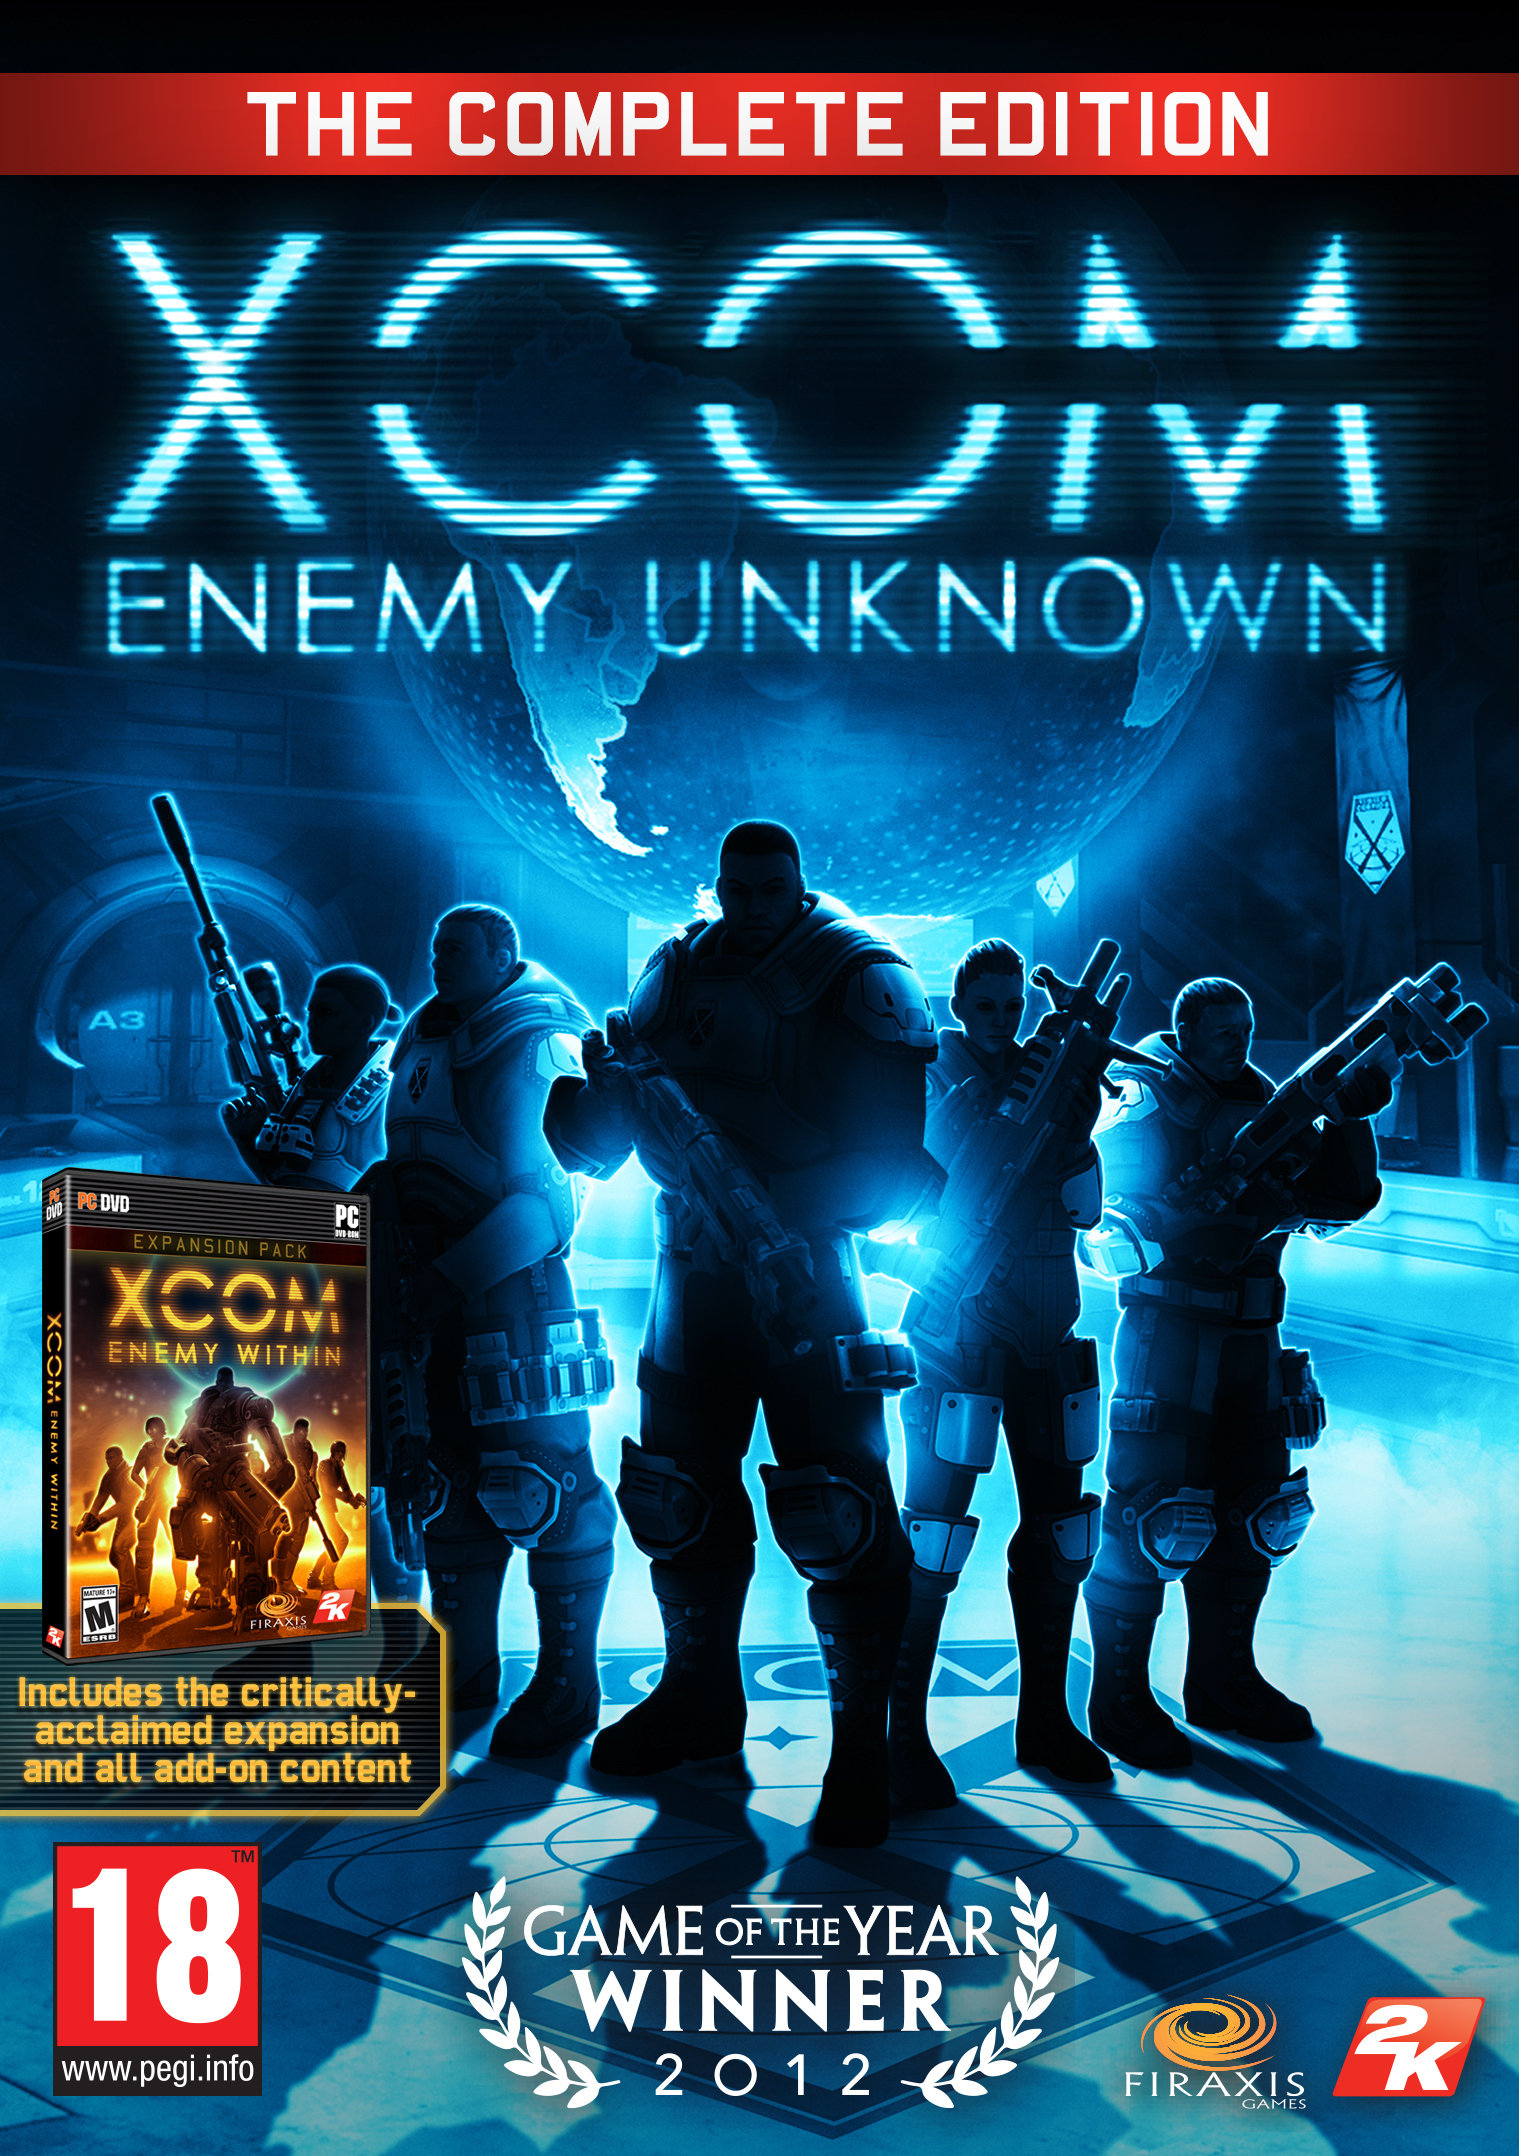 XCOM: Enemy Unknown – The Complete Edition